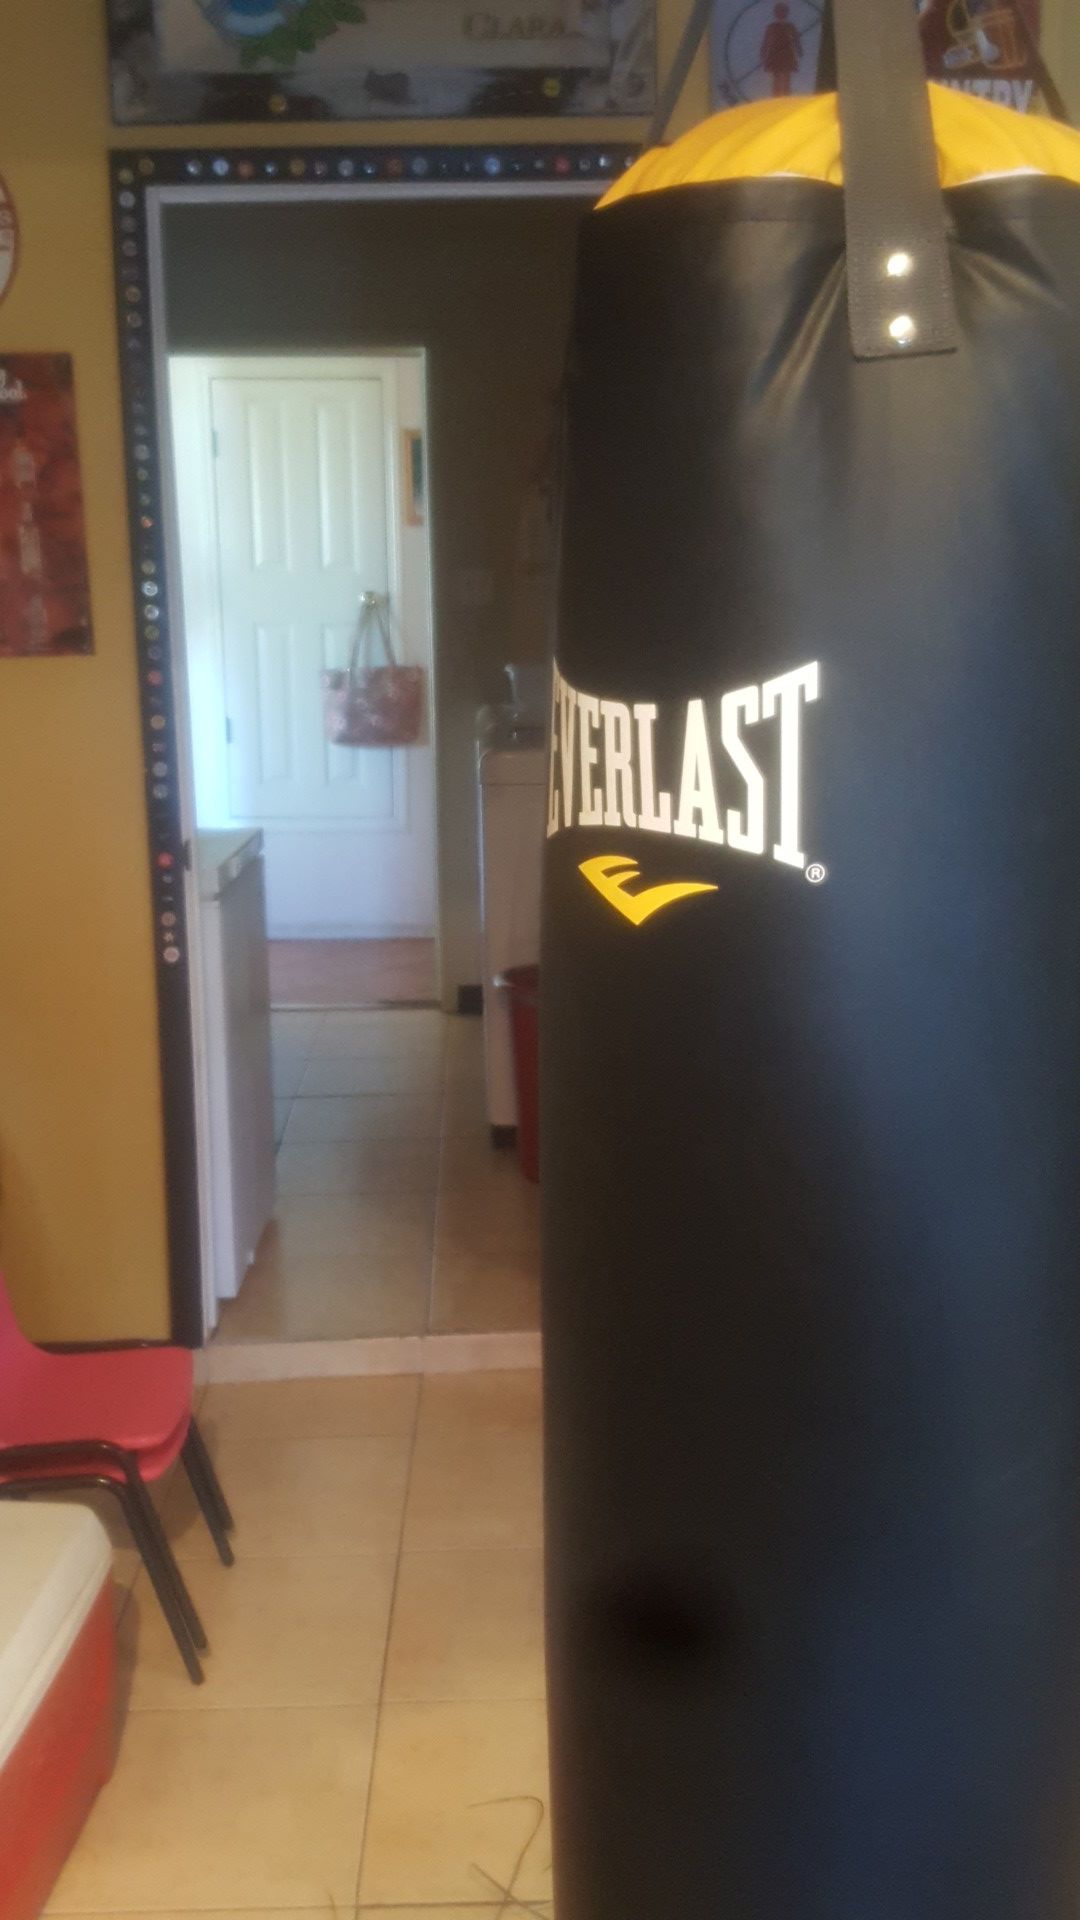 Everlast punching bag and gloves